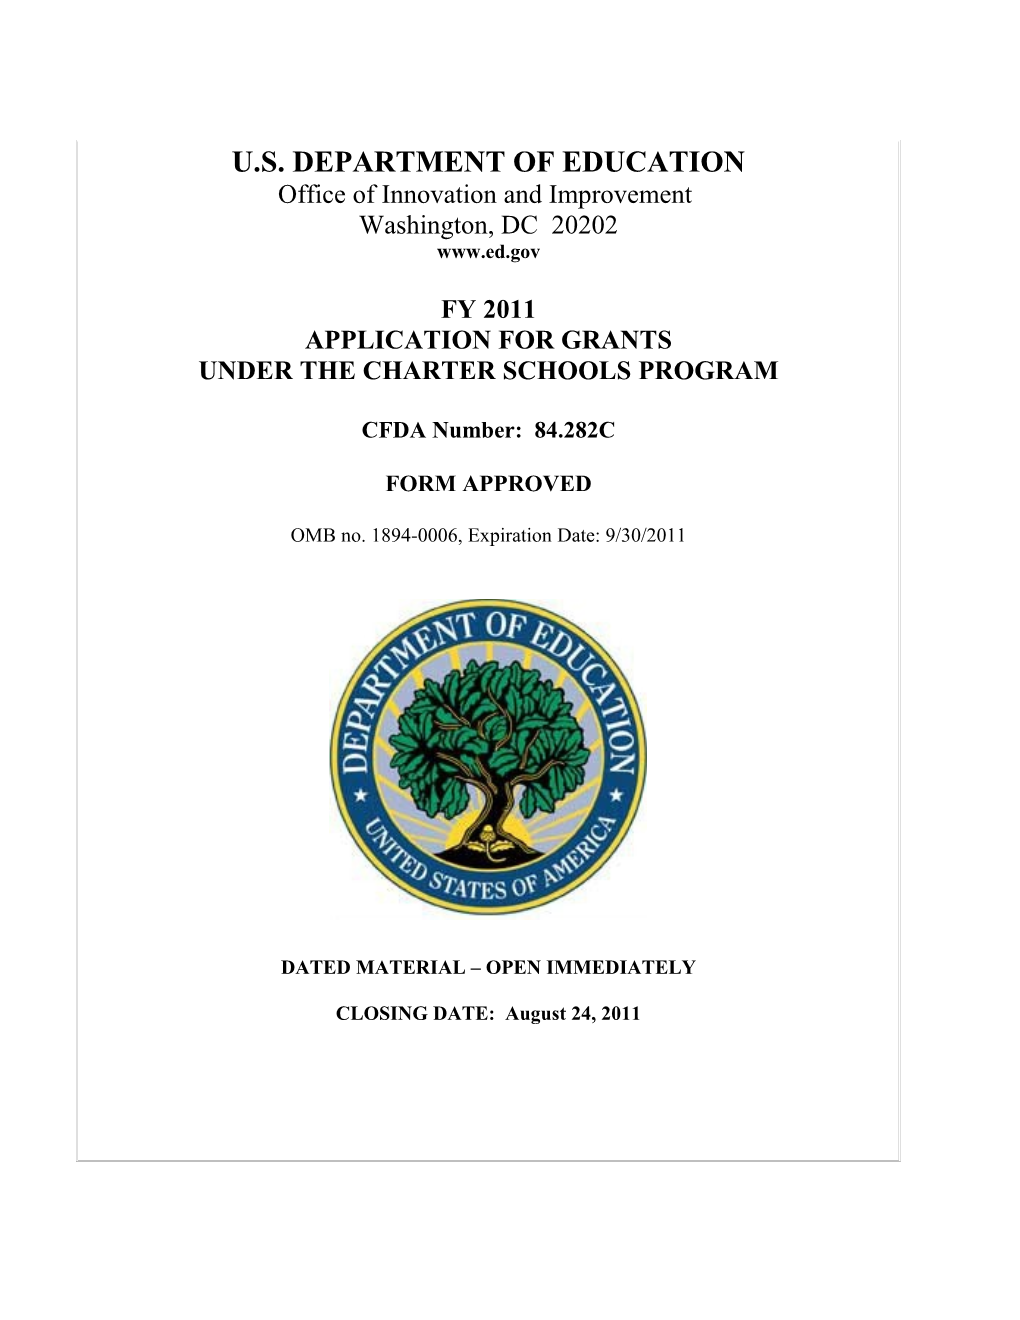 FY 2011 Application for Grants Under the Charter Schools Program (MS WORD)